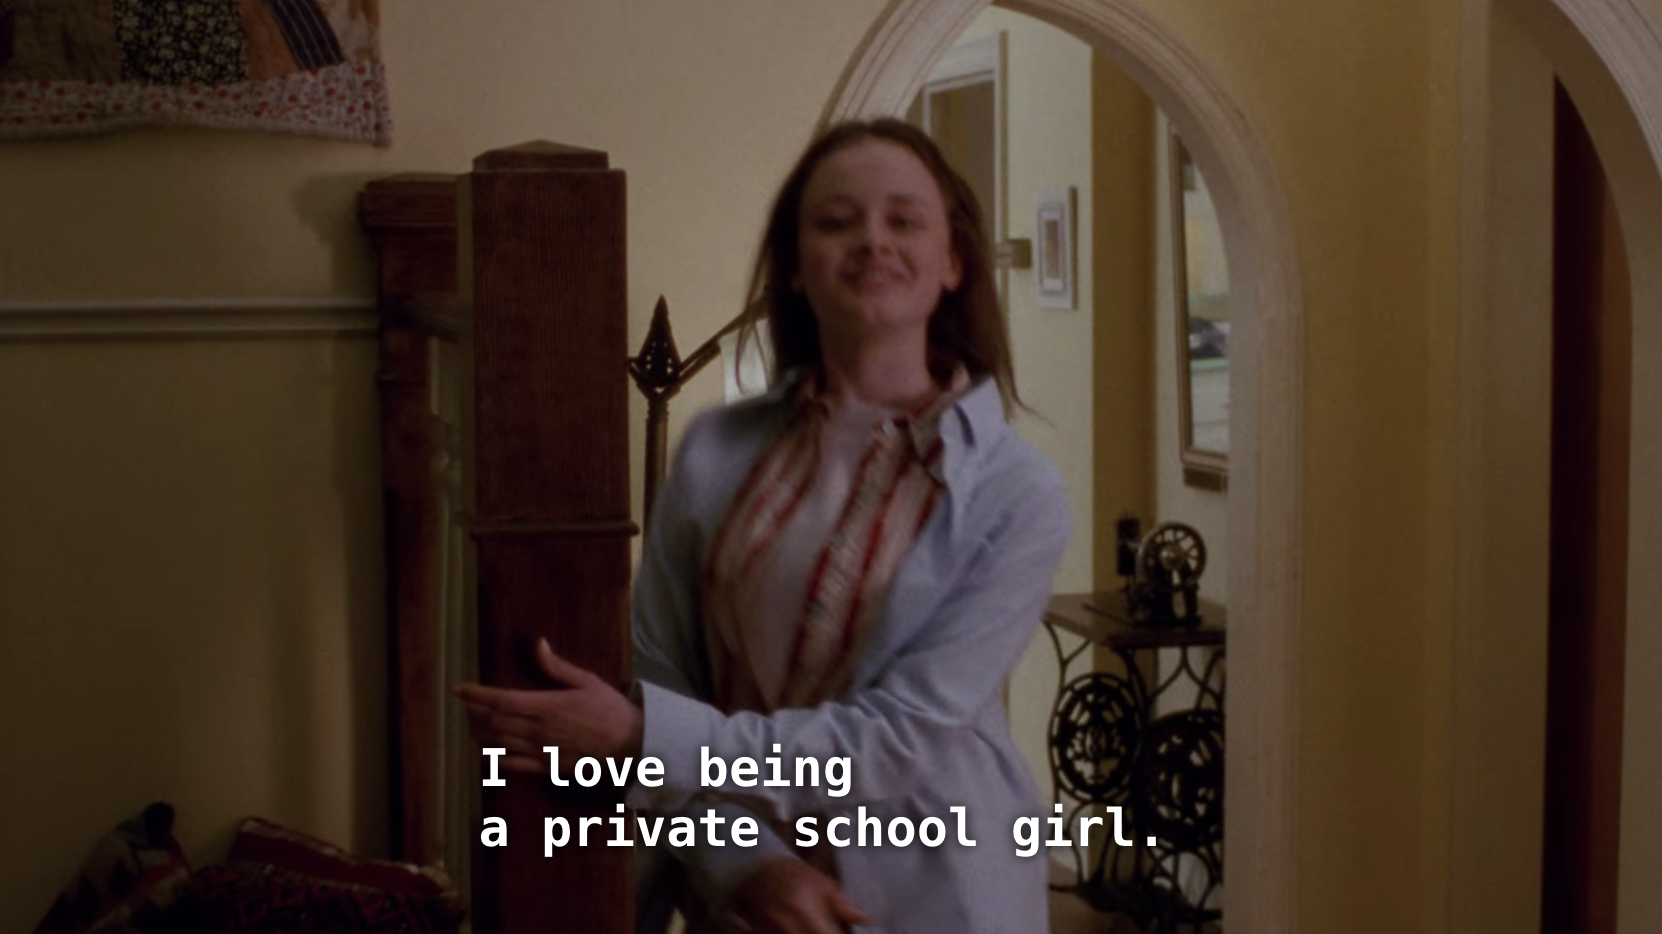 Rory flitting around their house saying how much she loves being a &quot;private school girl&quot;